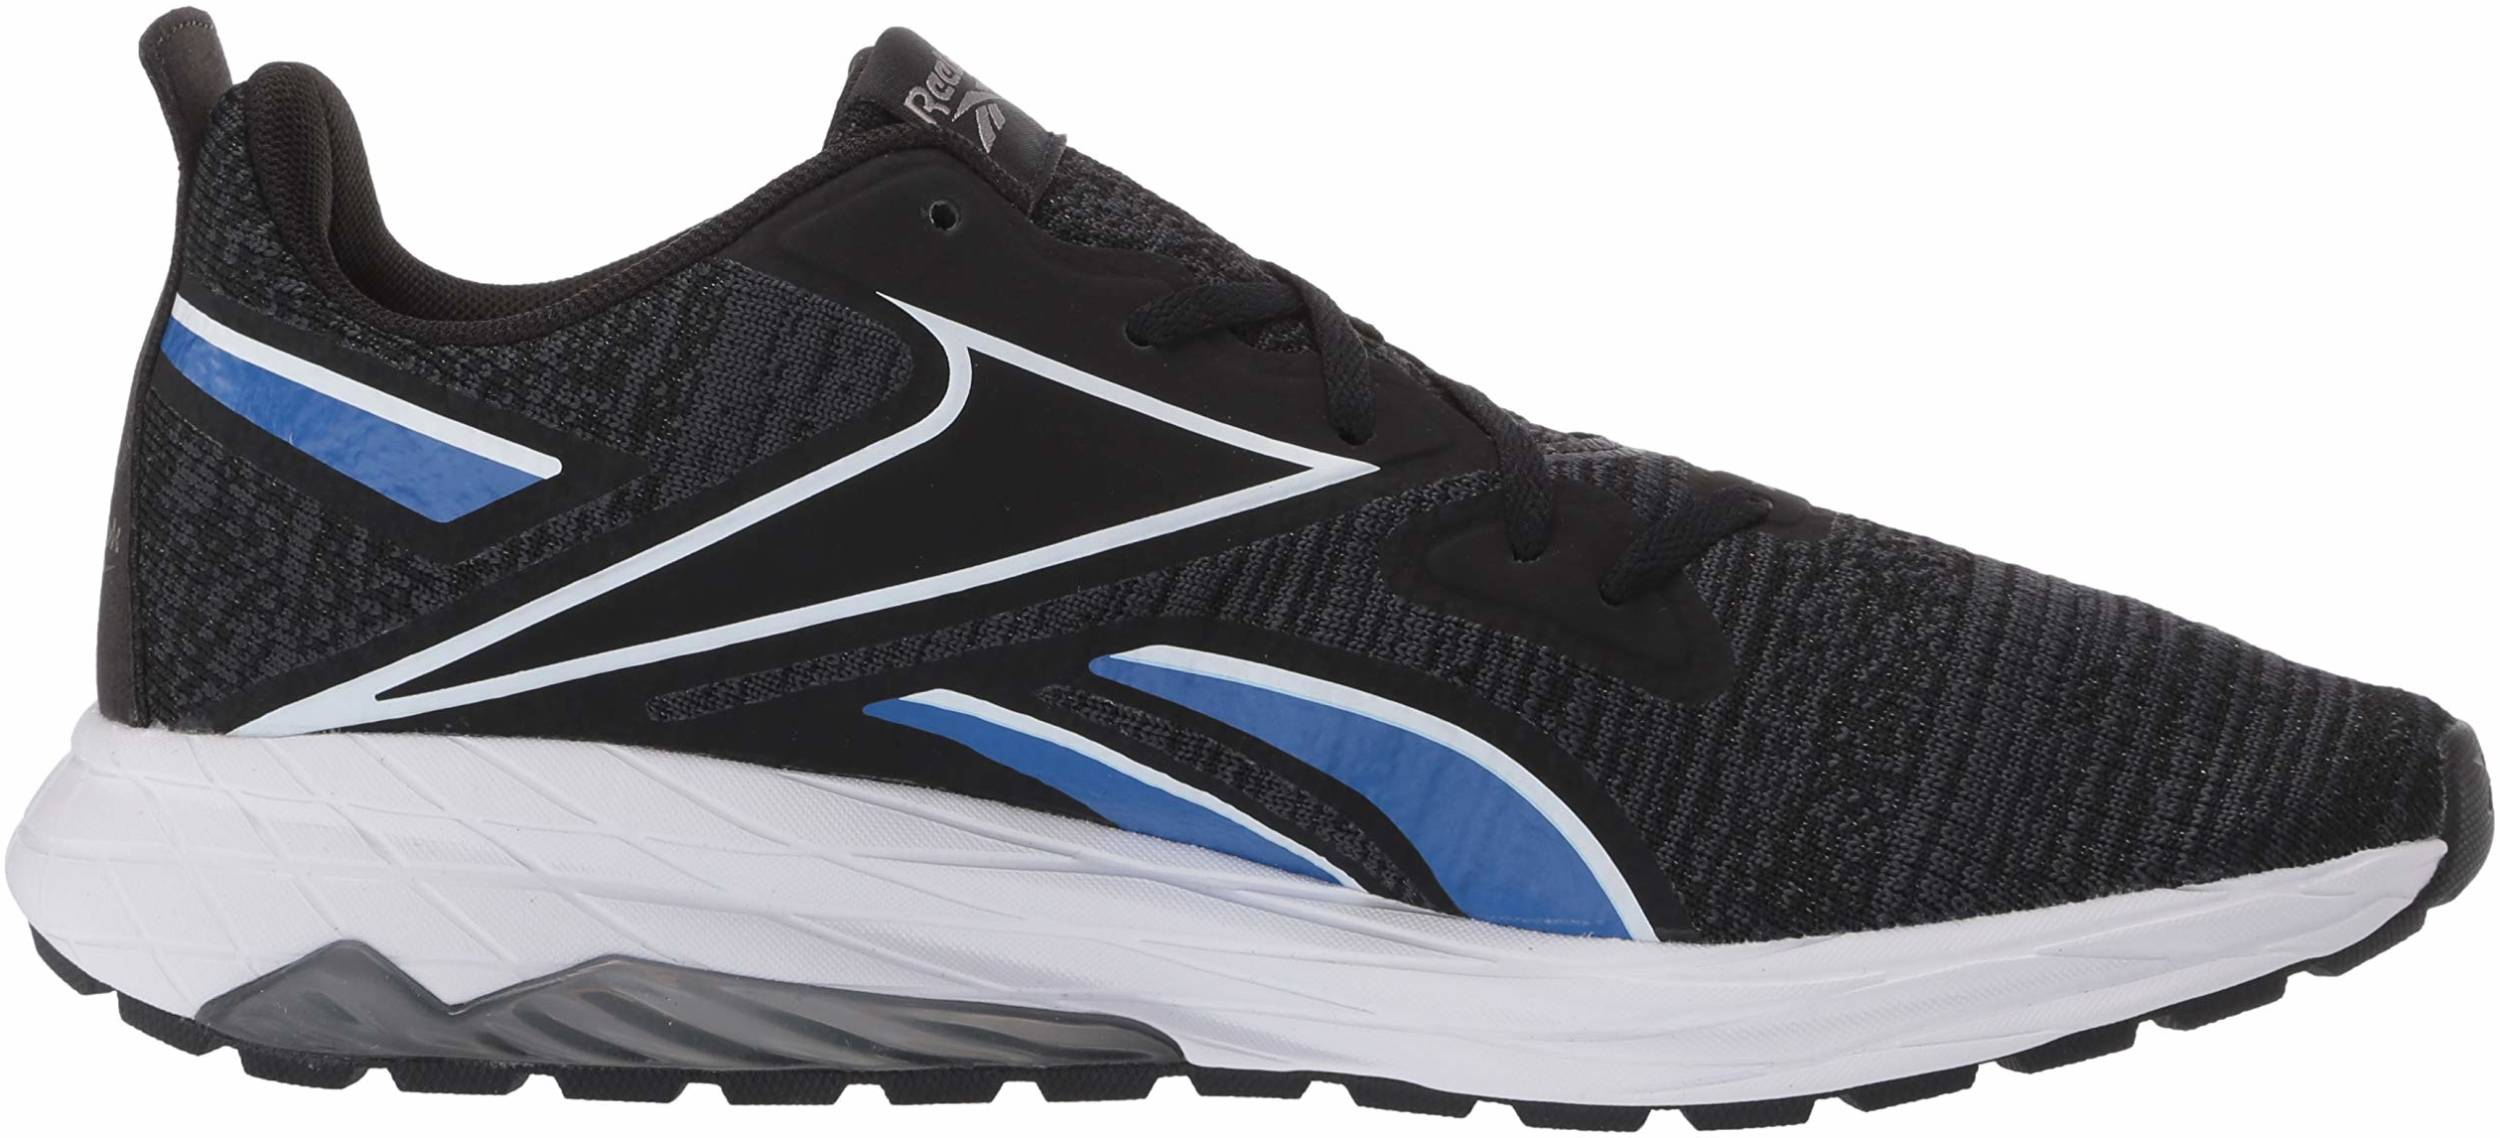 Save 56% on Reebok Running Shoes (120 